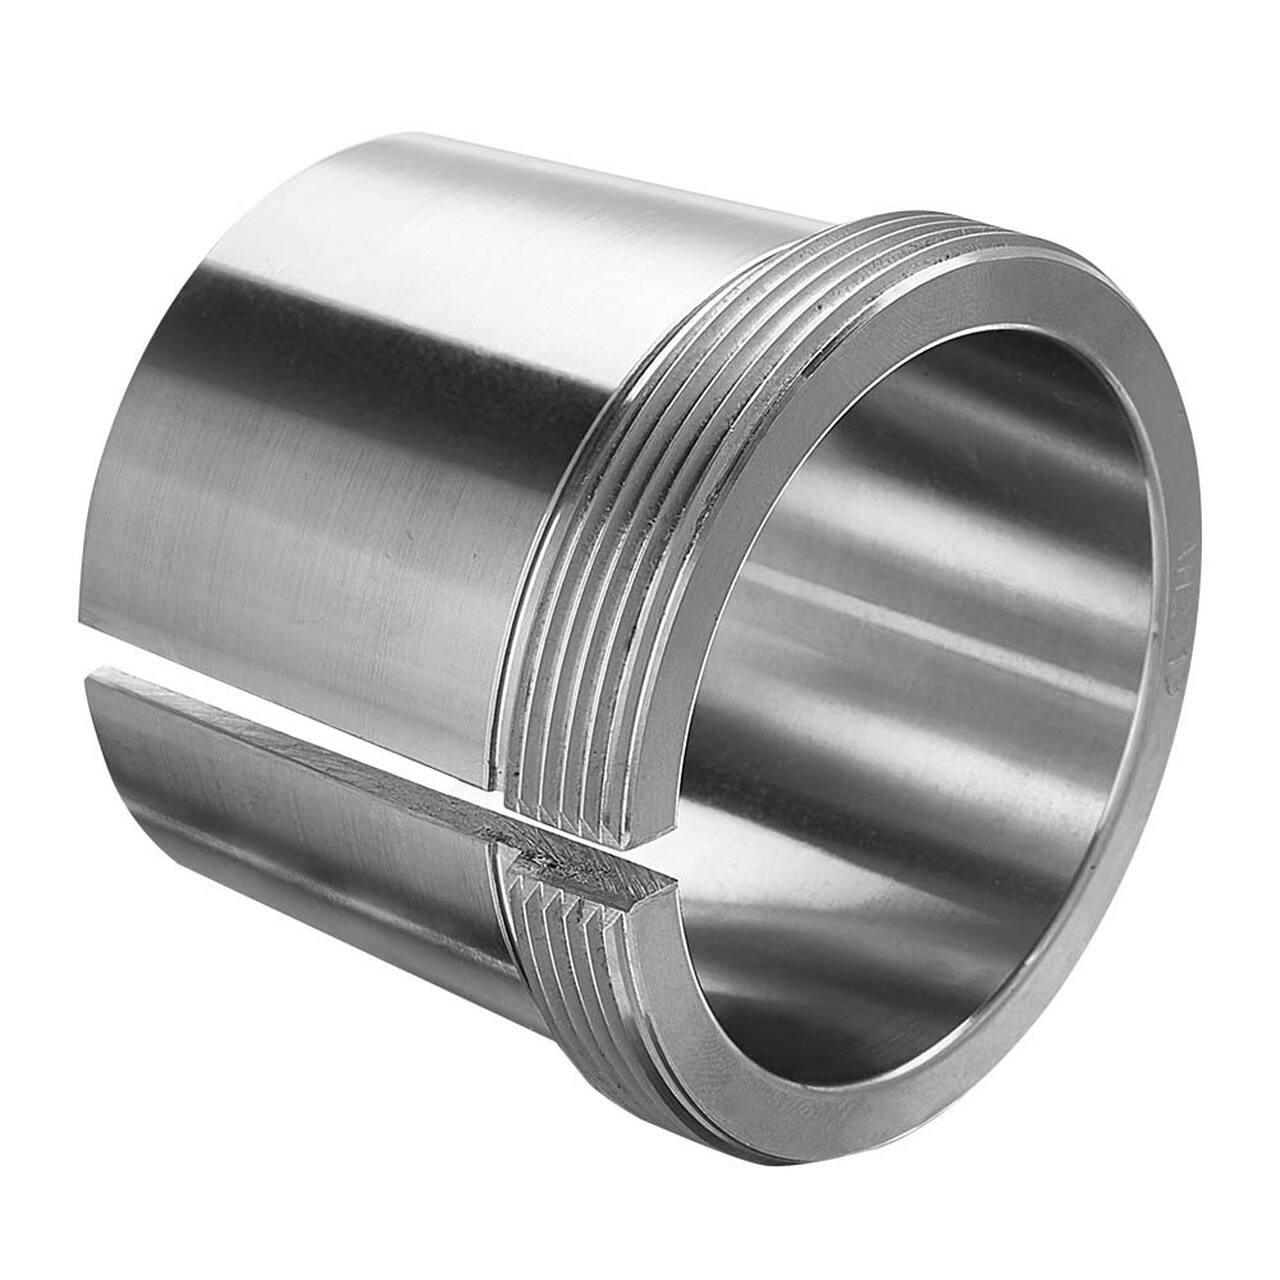 Sleeve Bearing: Machine Element Used for Smooth Running